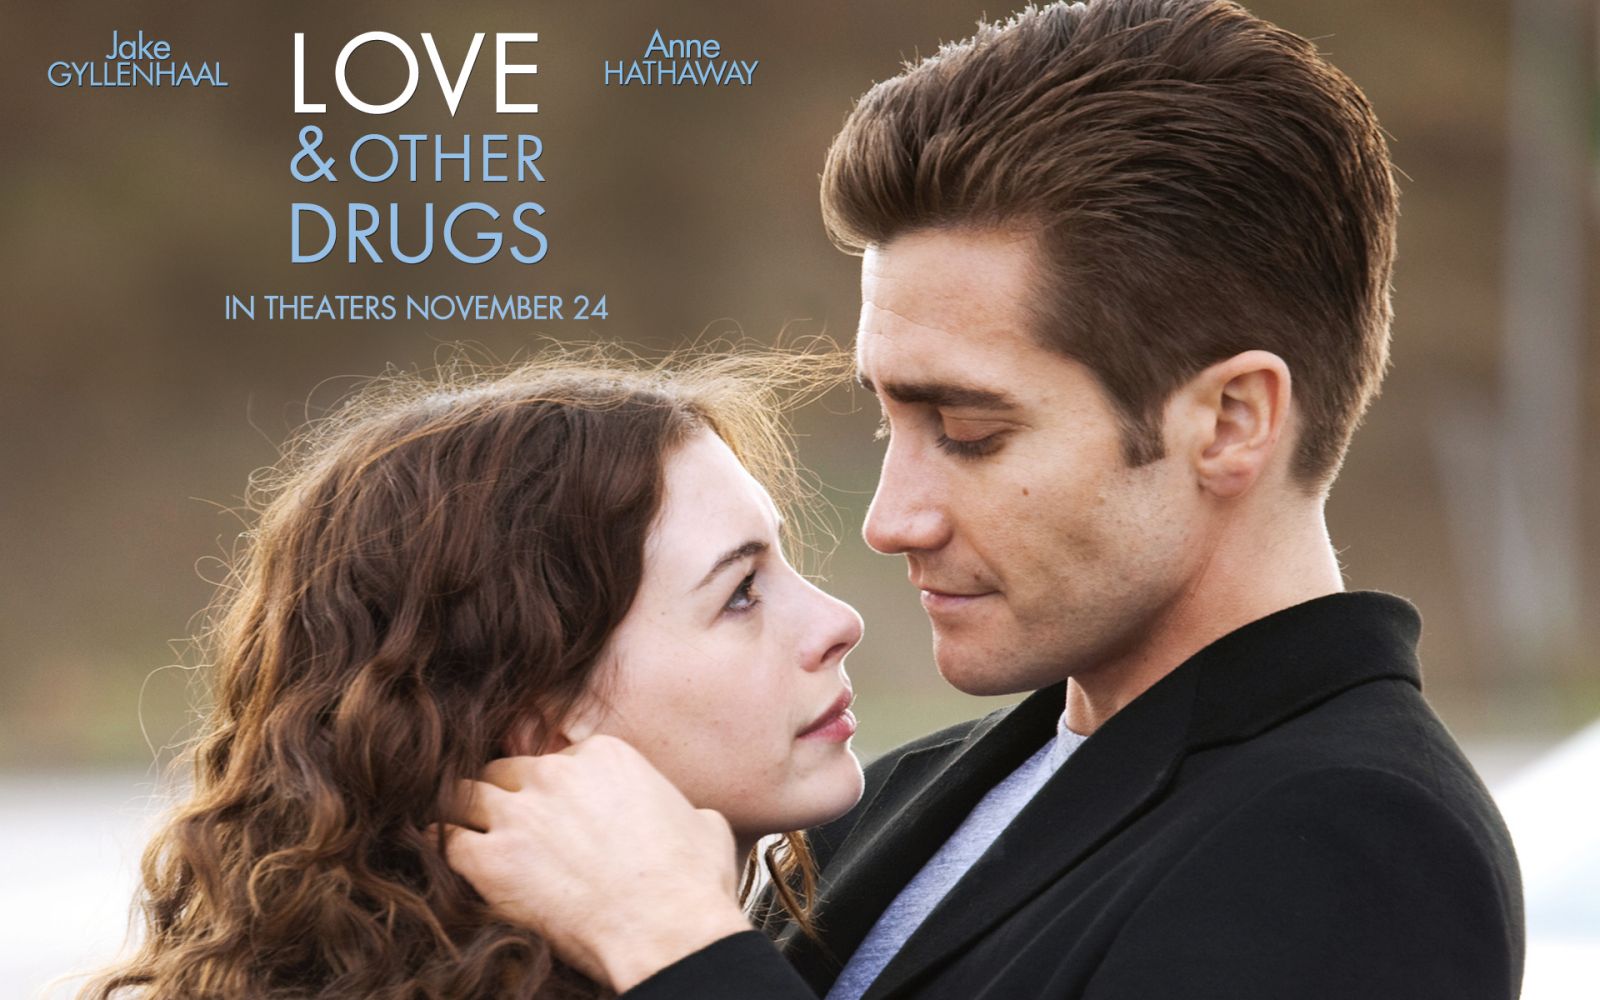 High Resolution Wallpaper | Love & Other Drugs 1600x1000 px